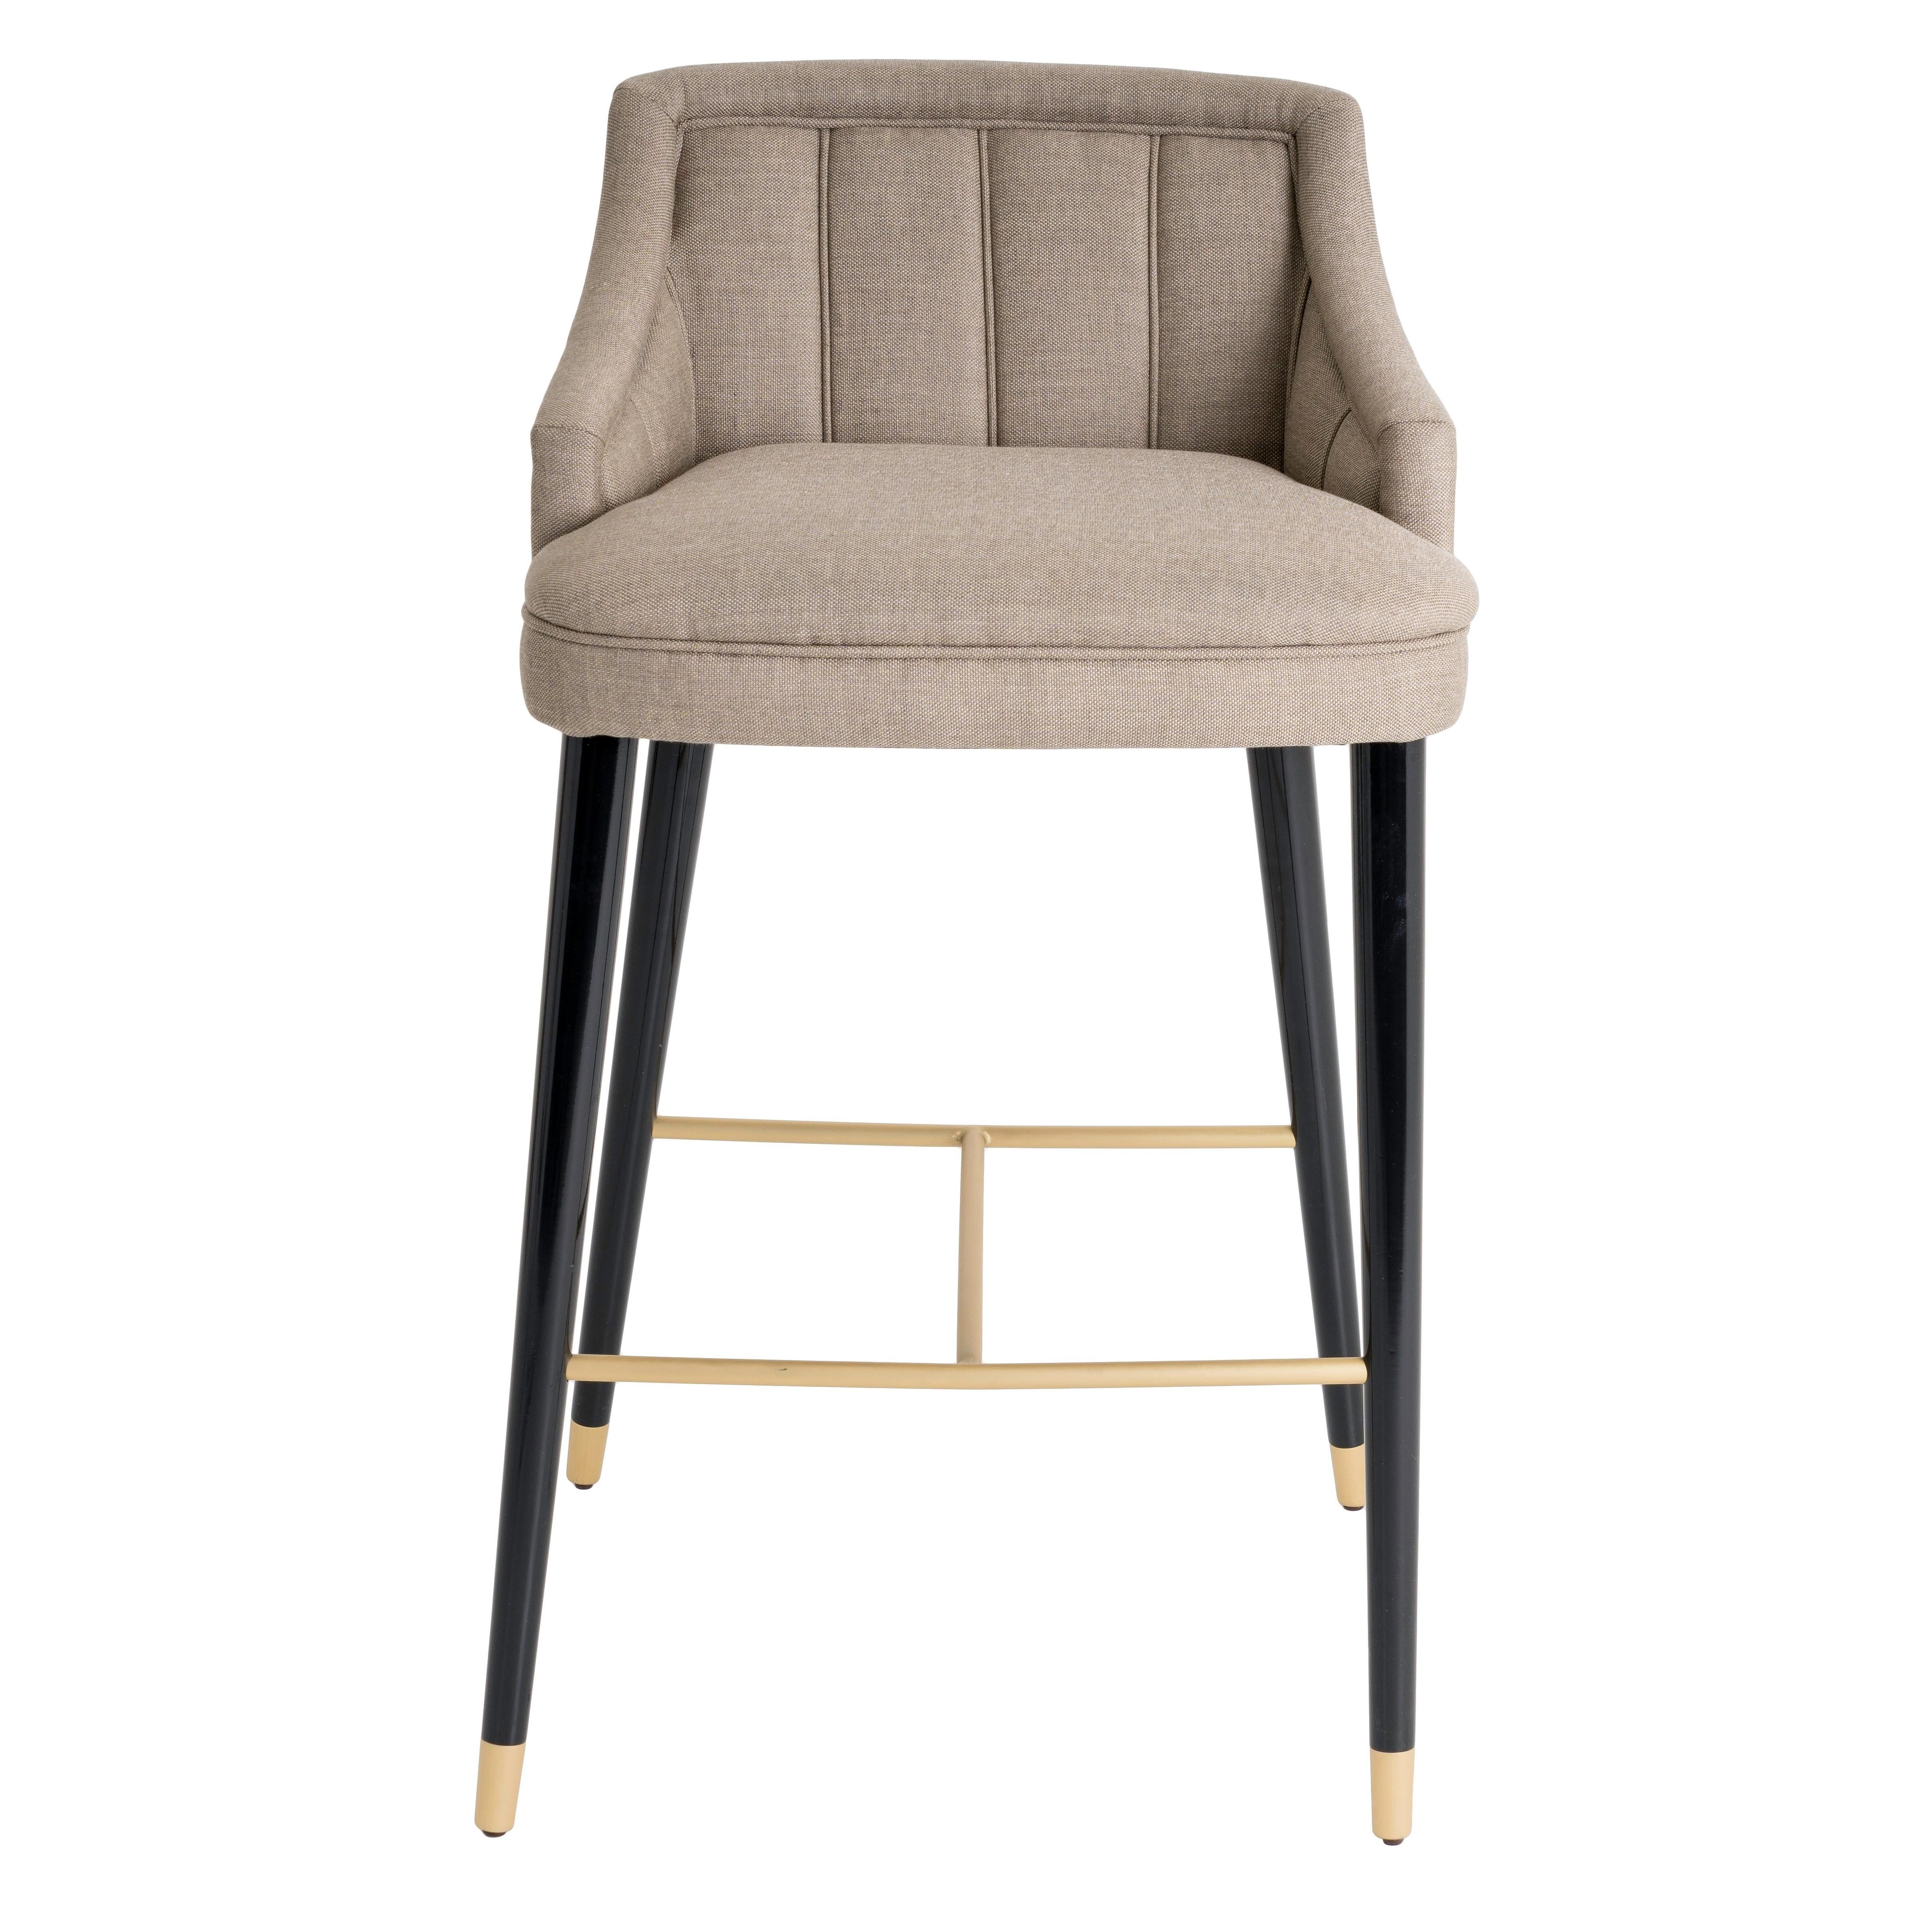 With an elegant and timeless design, the high stool CORDOBA is upholsered in fabric, while the legs are lacquered and equipped with footrests and brass feet.‎ Cordoba is available in fabric, leather, eco-leather or COM and is possible to customize